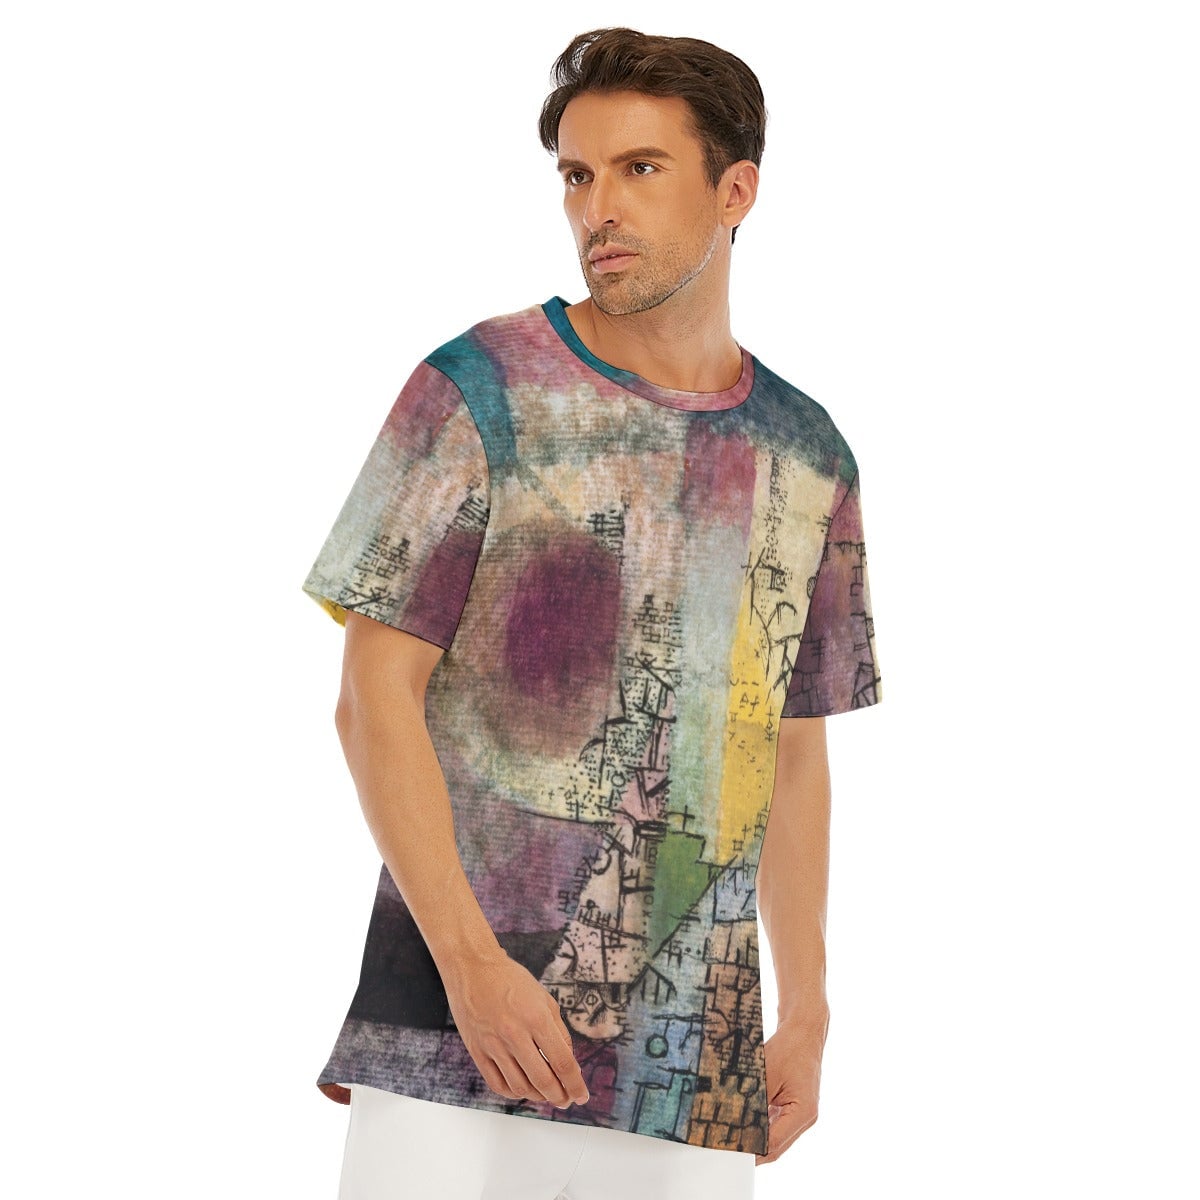 Untitled Painting Paul Klee T-Shirt - Famous Artwork Tee